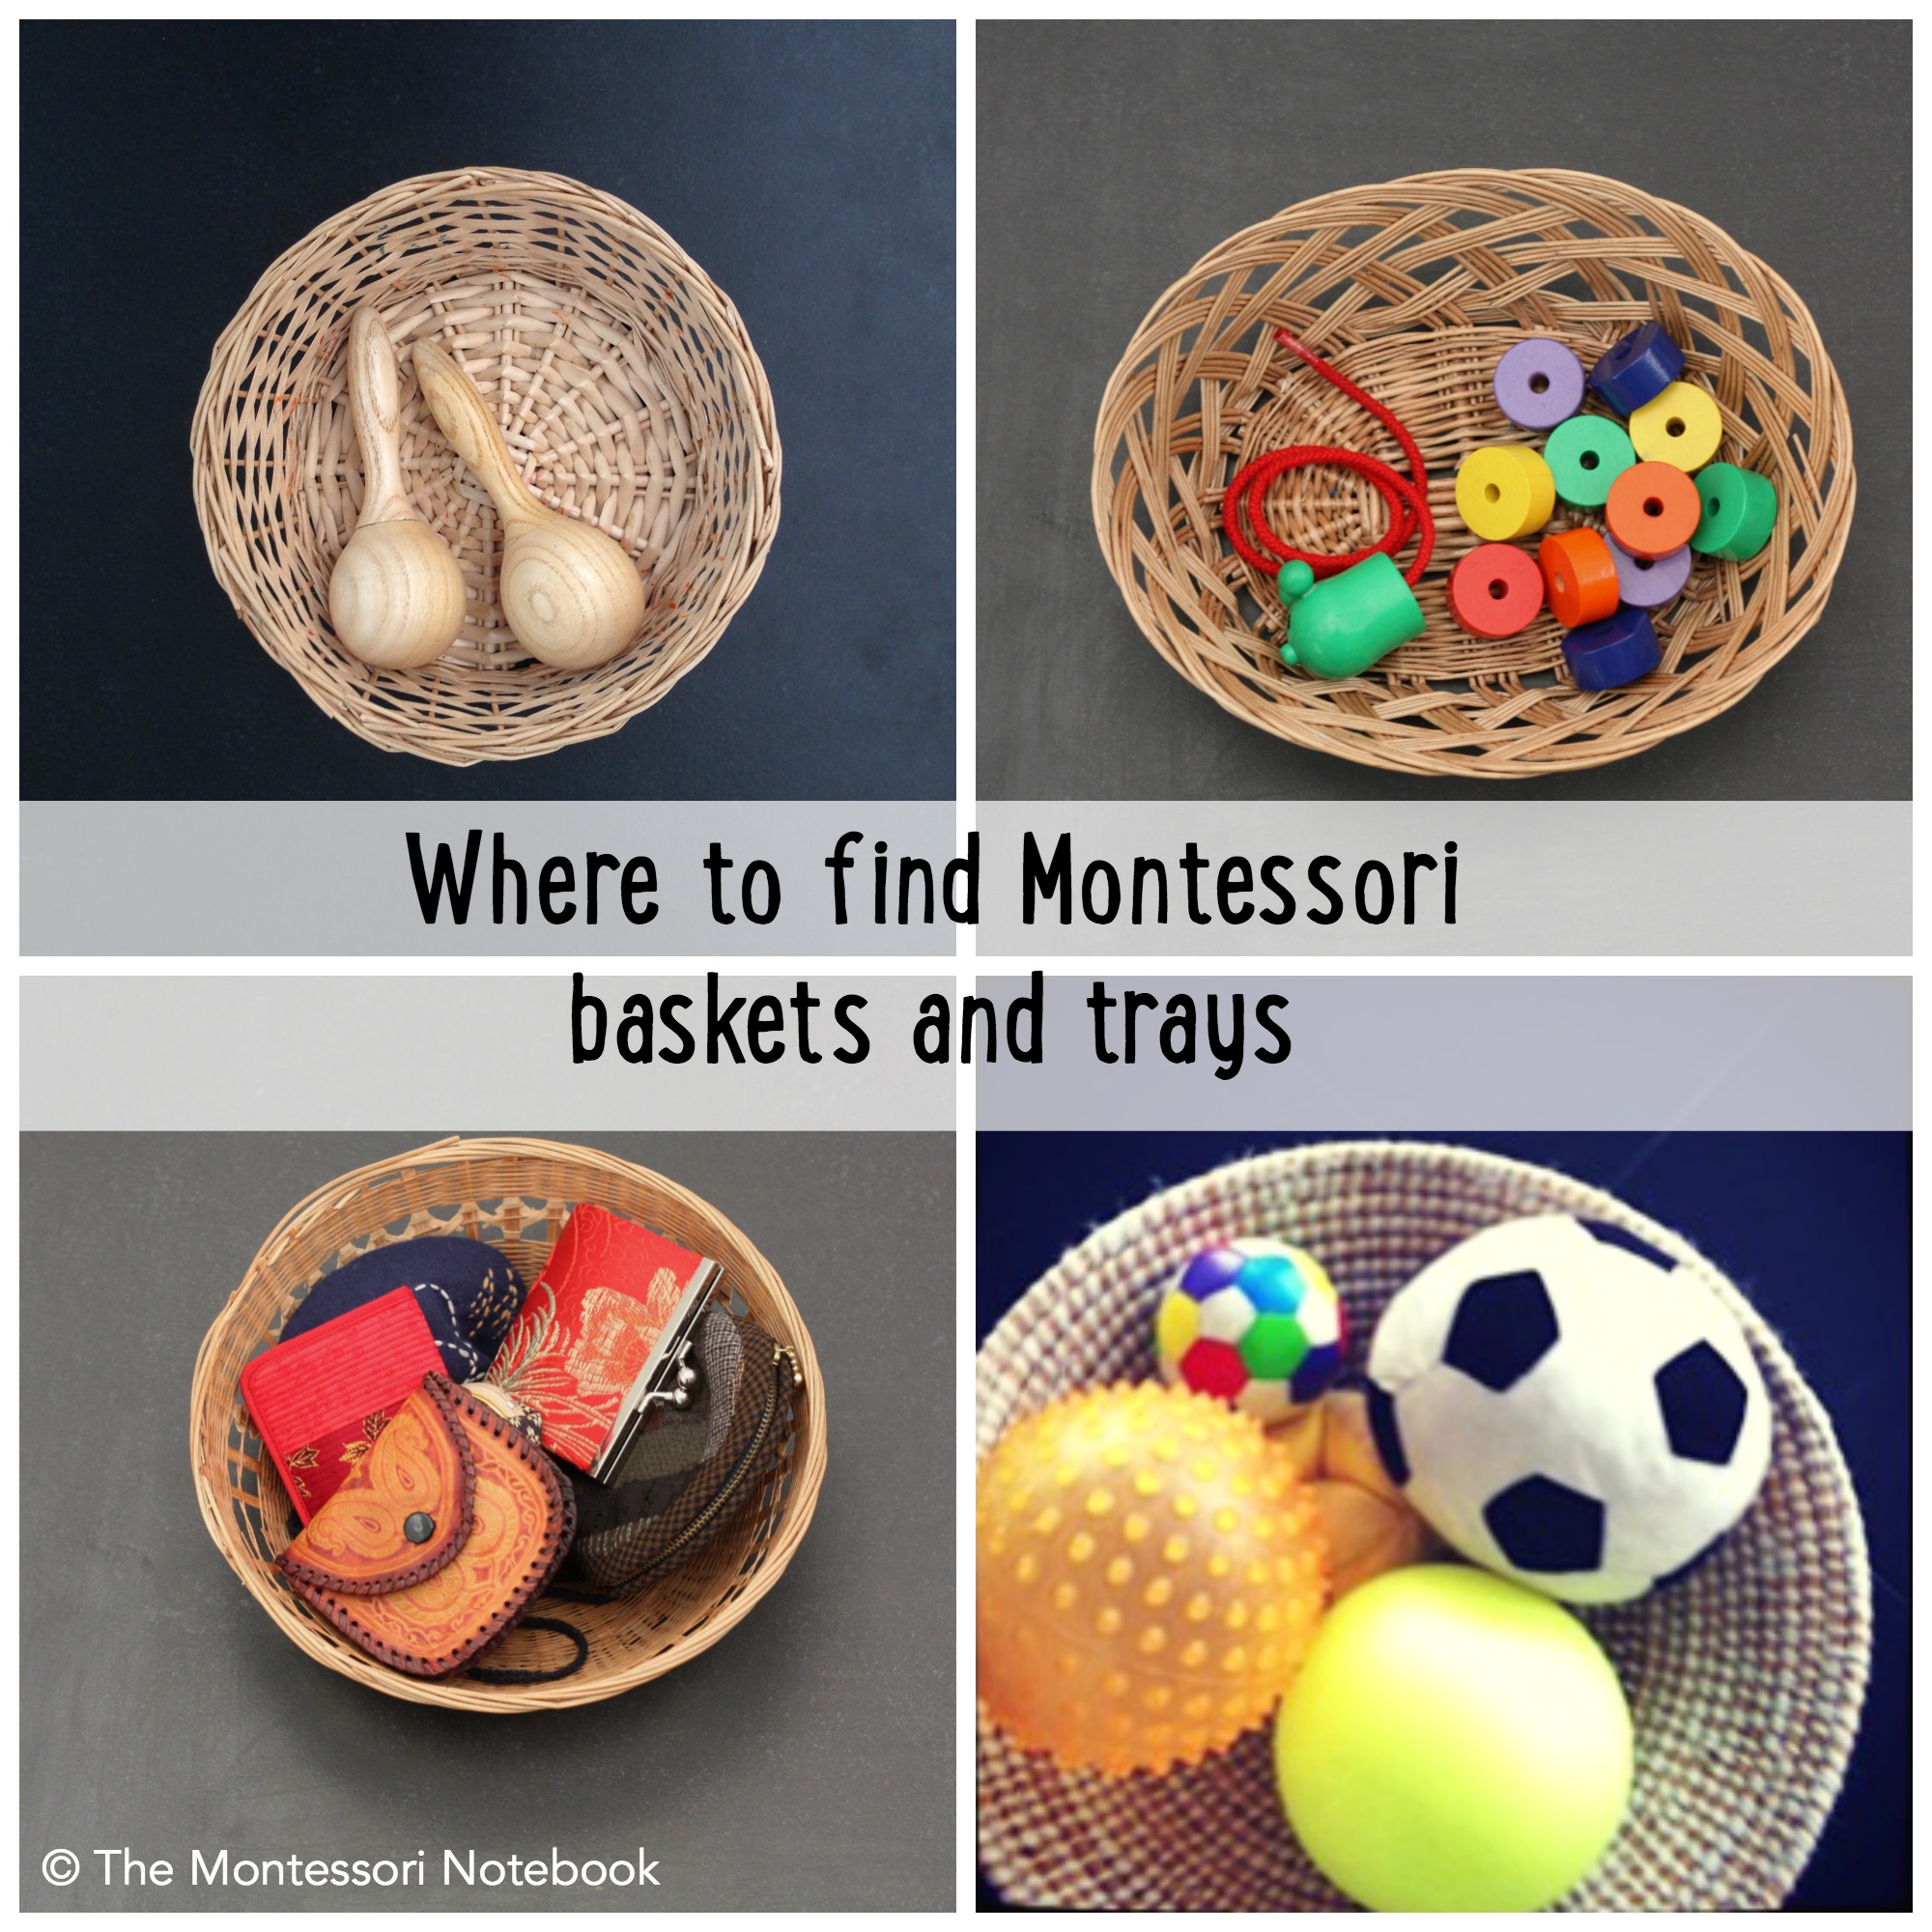 where to find Montessori baskets and trays